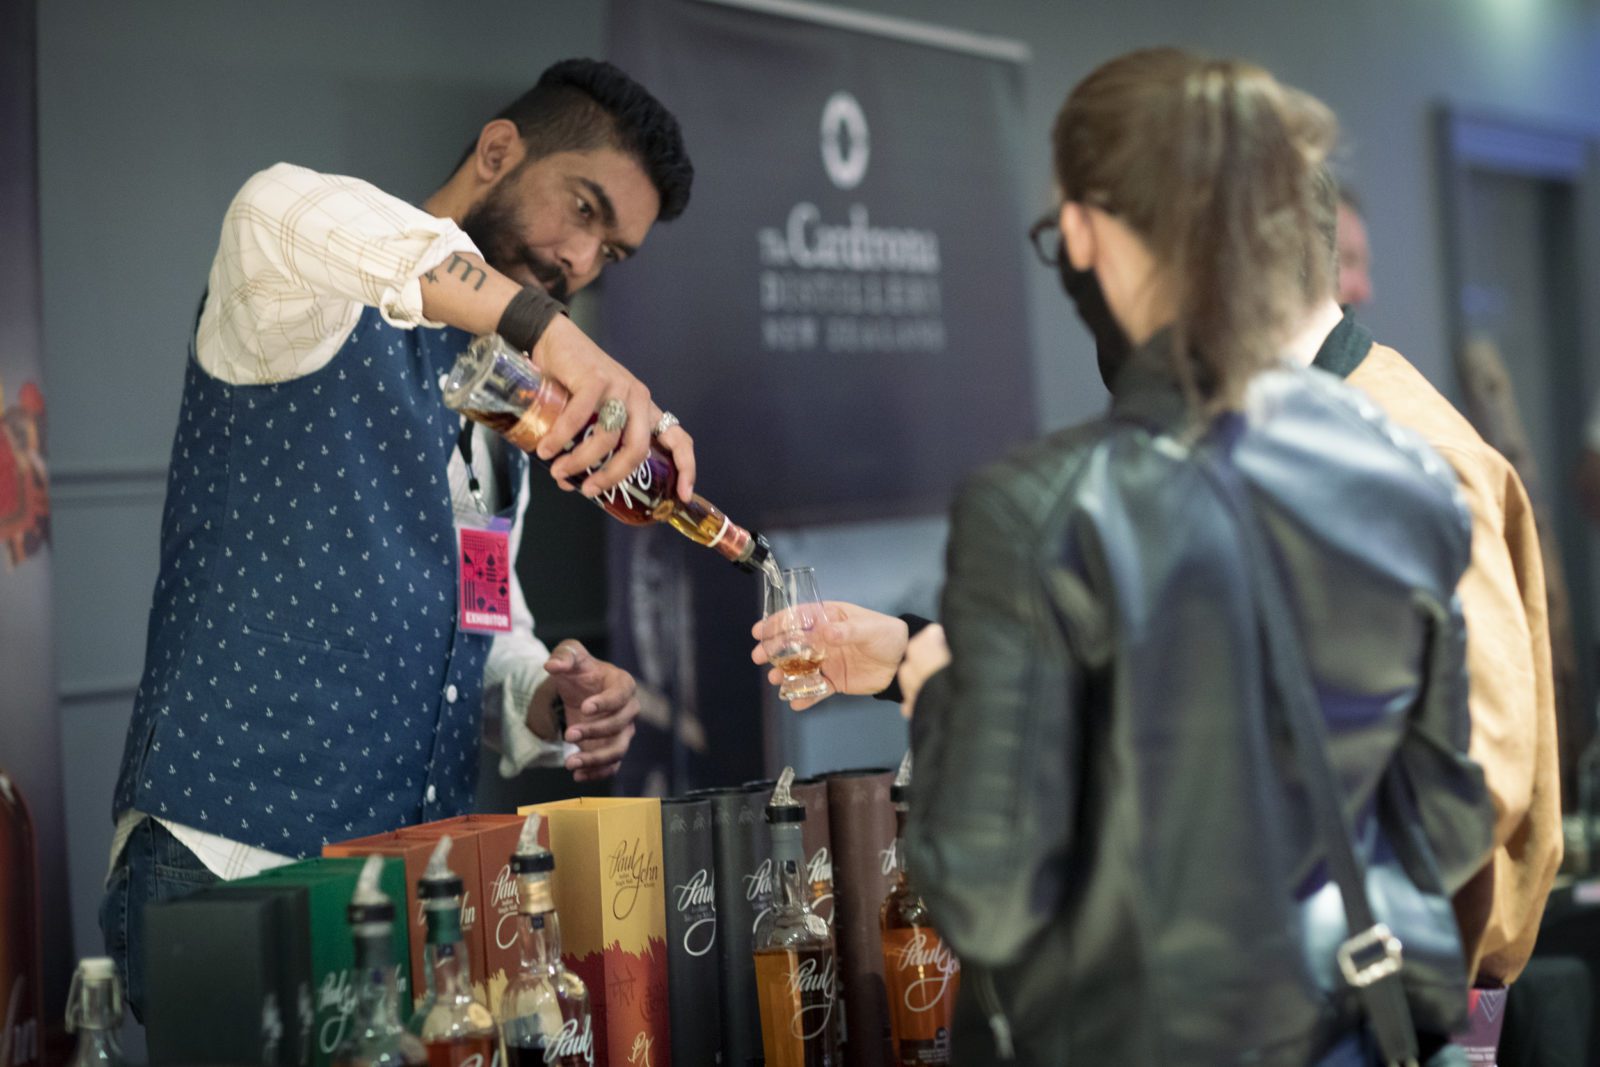 National Whisky Festival Edinburgh Ticket prices, times and